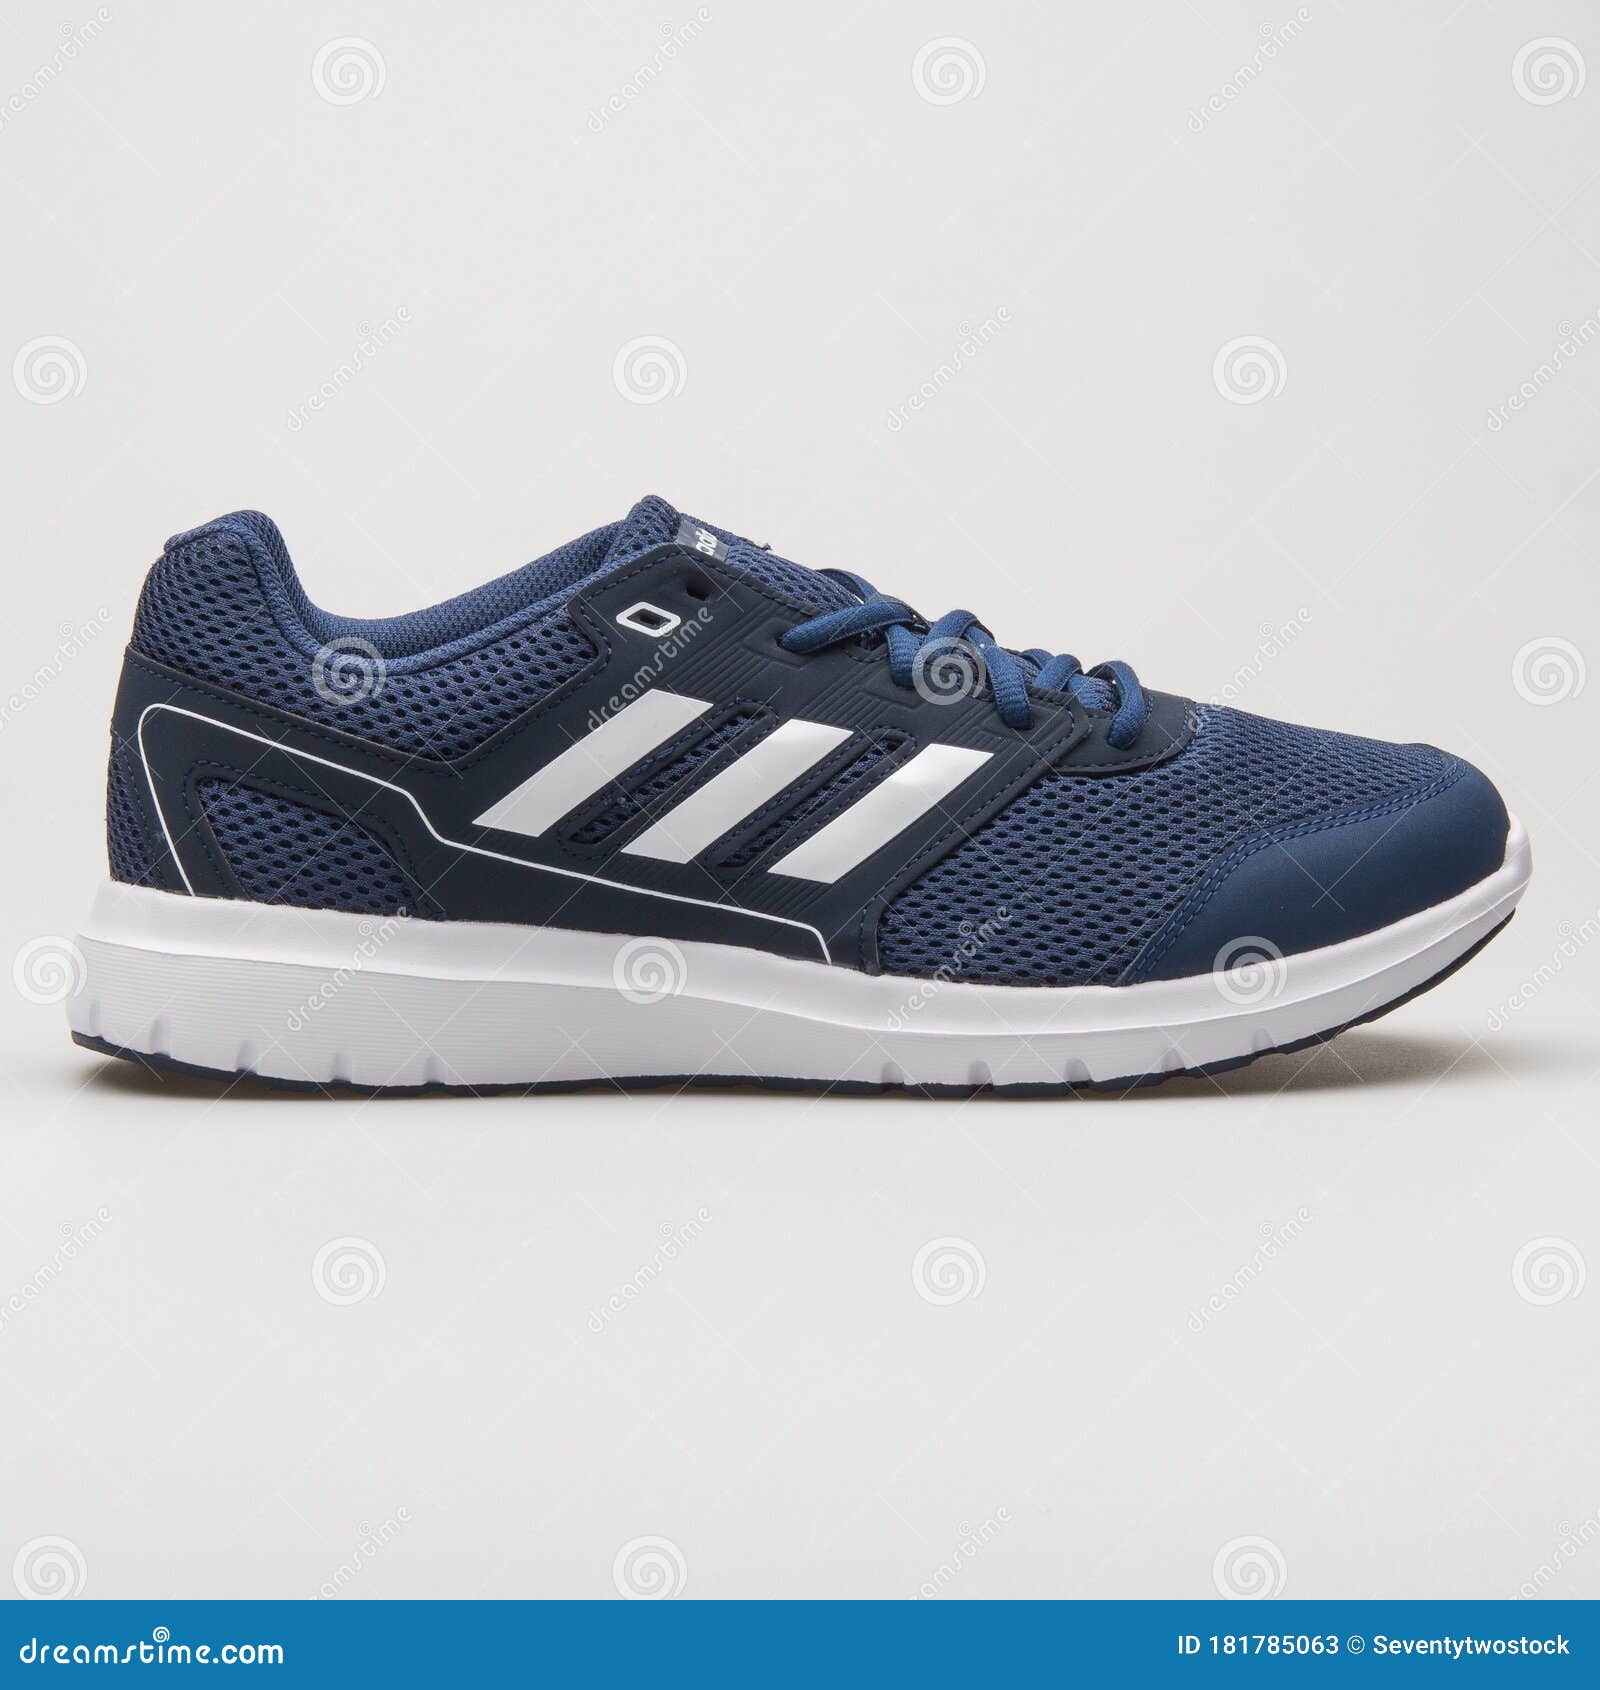 Adidas Duramo Lite 2.0 Navy Blue and White Sneaker Editorial Stock Photo -  Image of accessories, fashion: 181785063